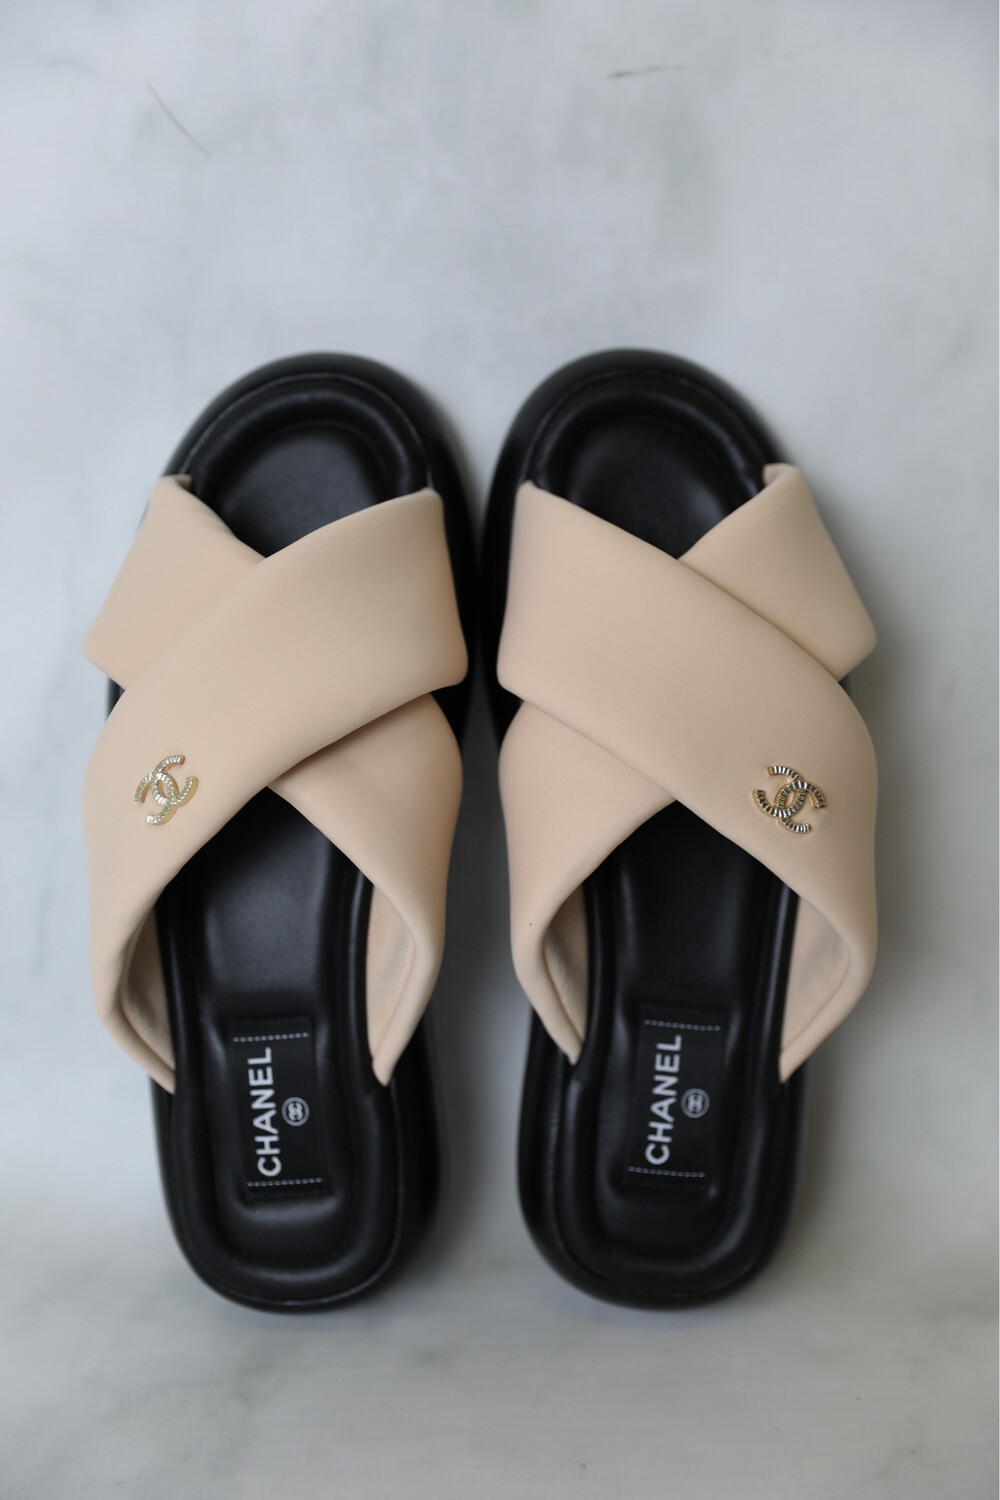 Chanel Shoes Crossover Slide Sandals, Beige Fabric, Size 41, New in Box  WA001